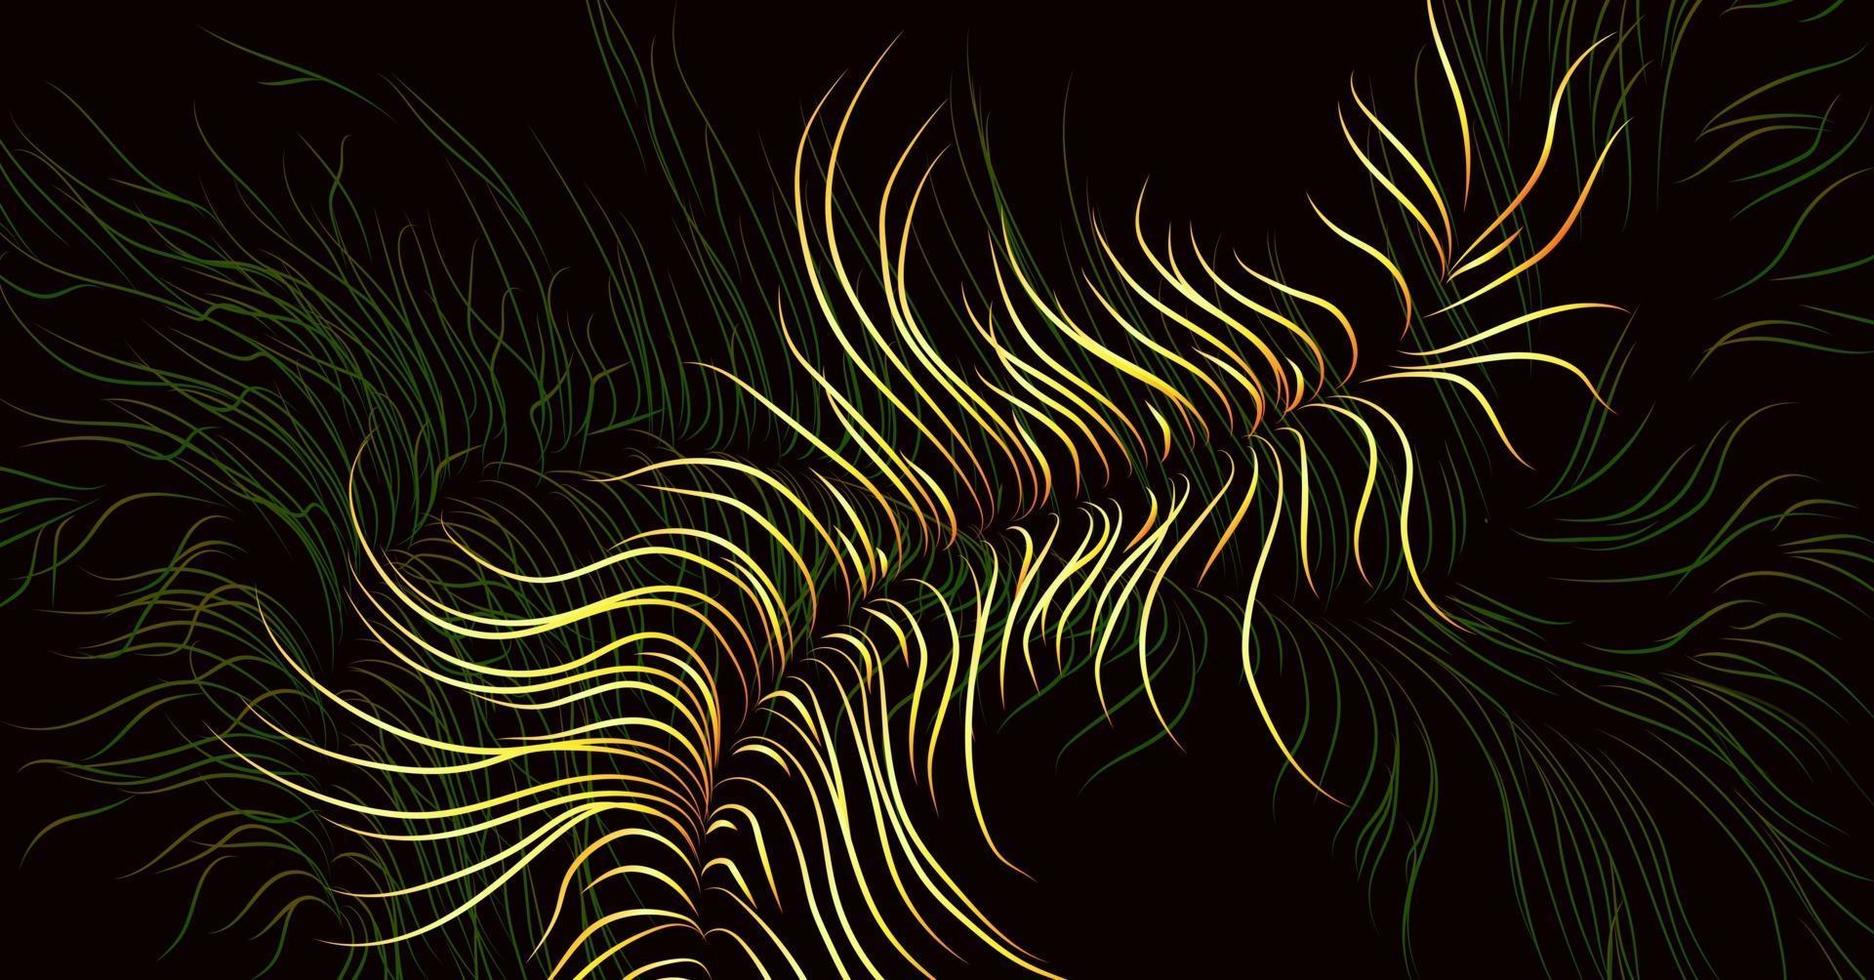 abstract vector background image with clear outline of fuzz or feather in gold